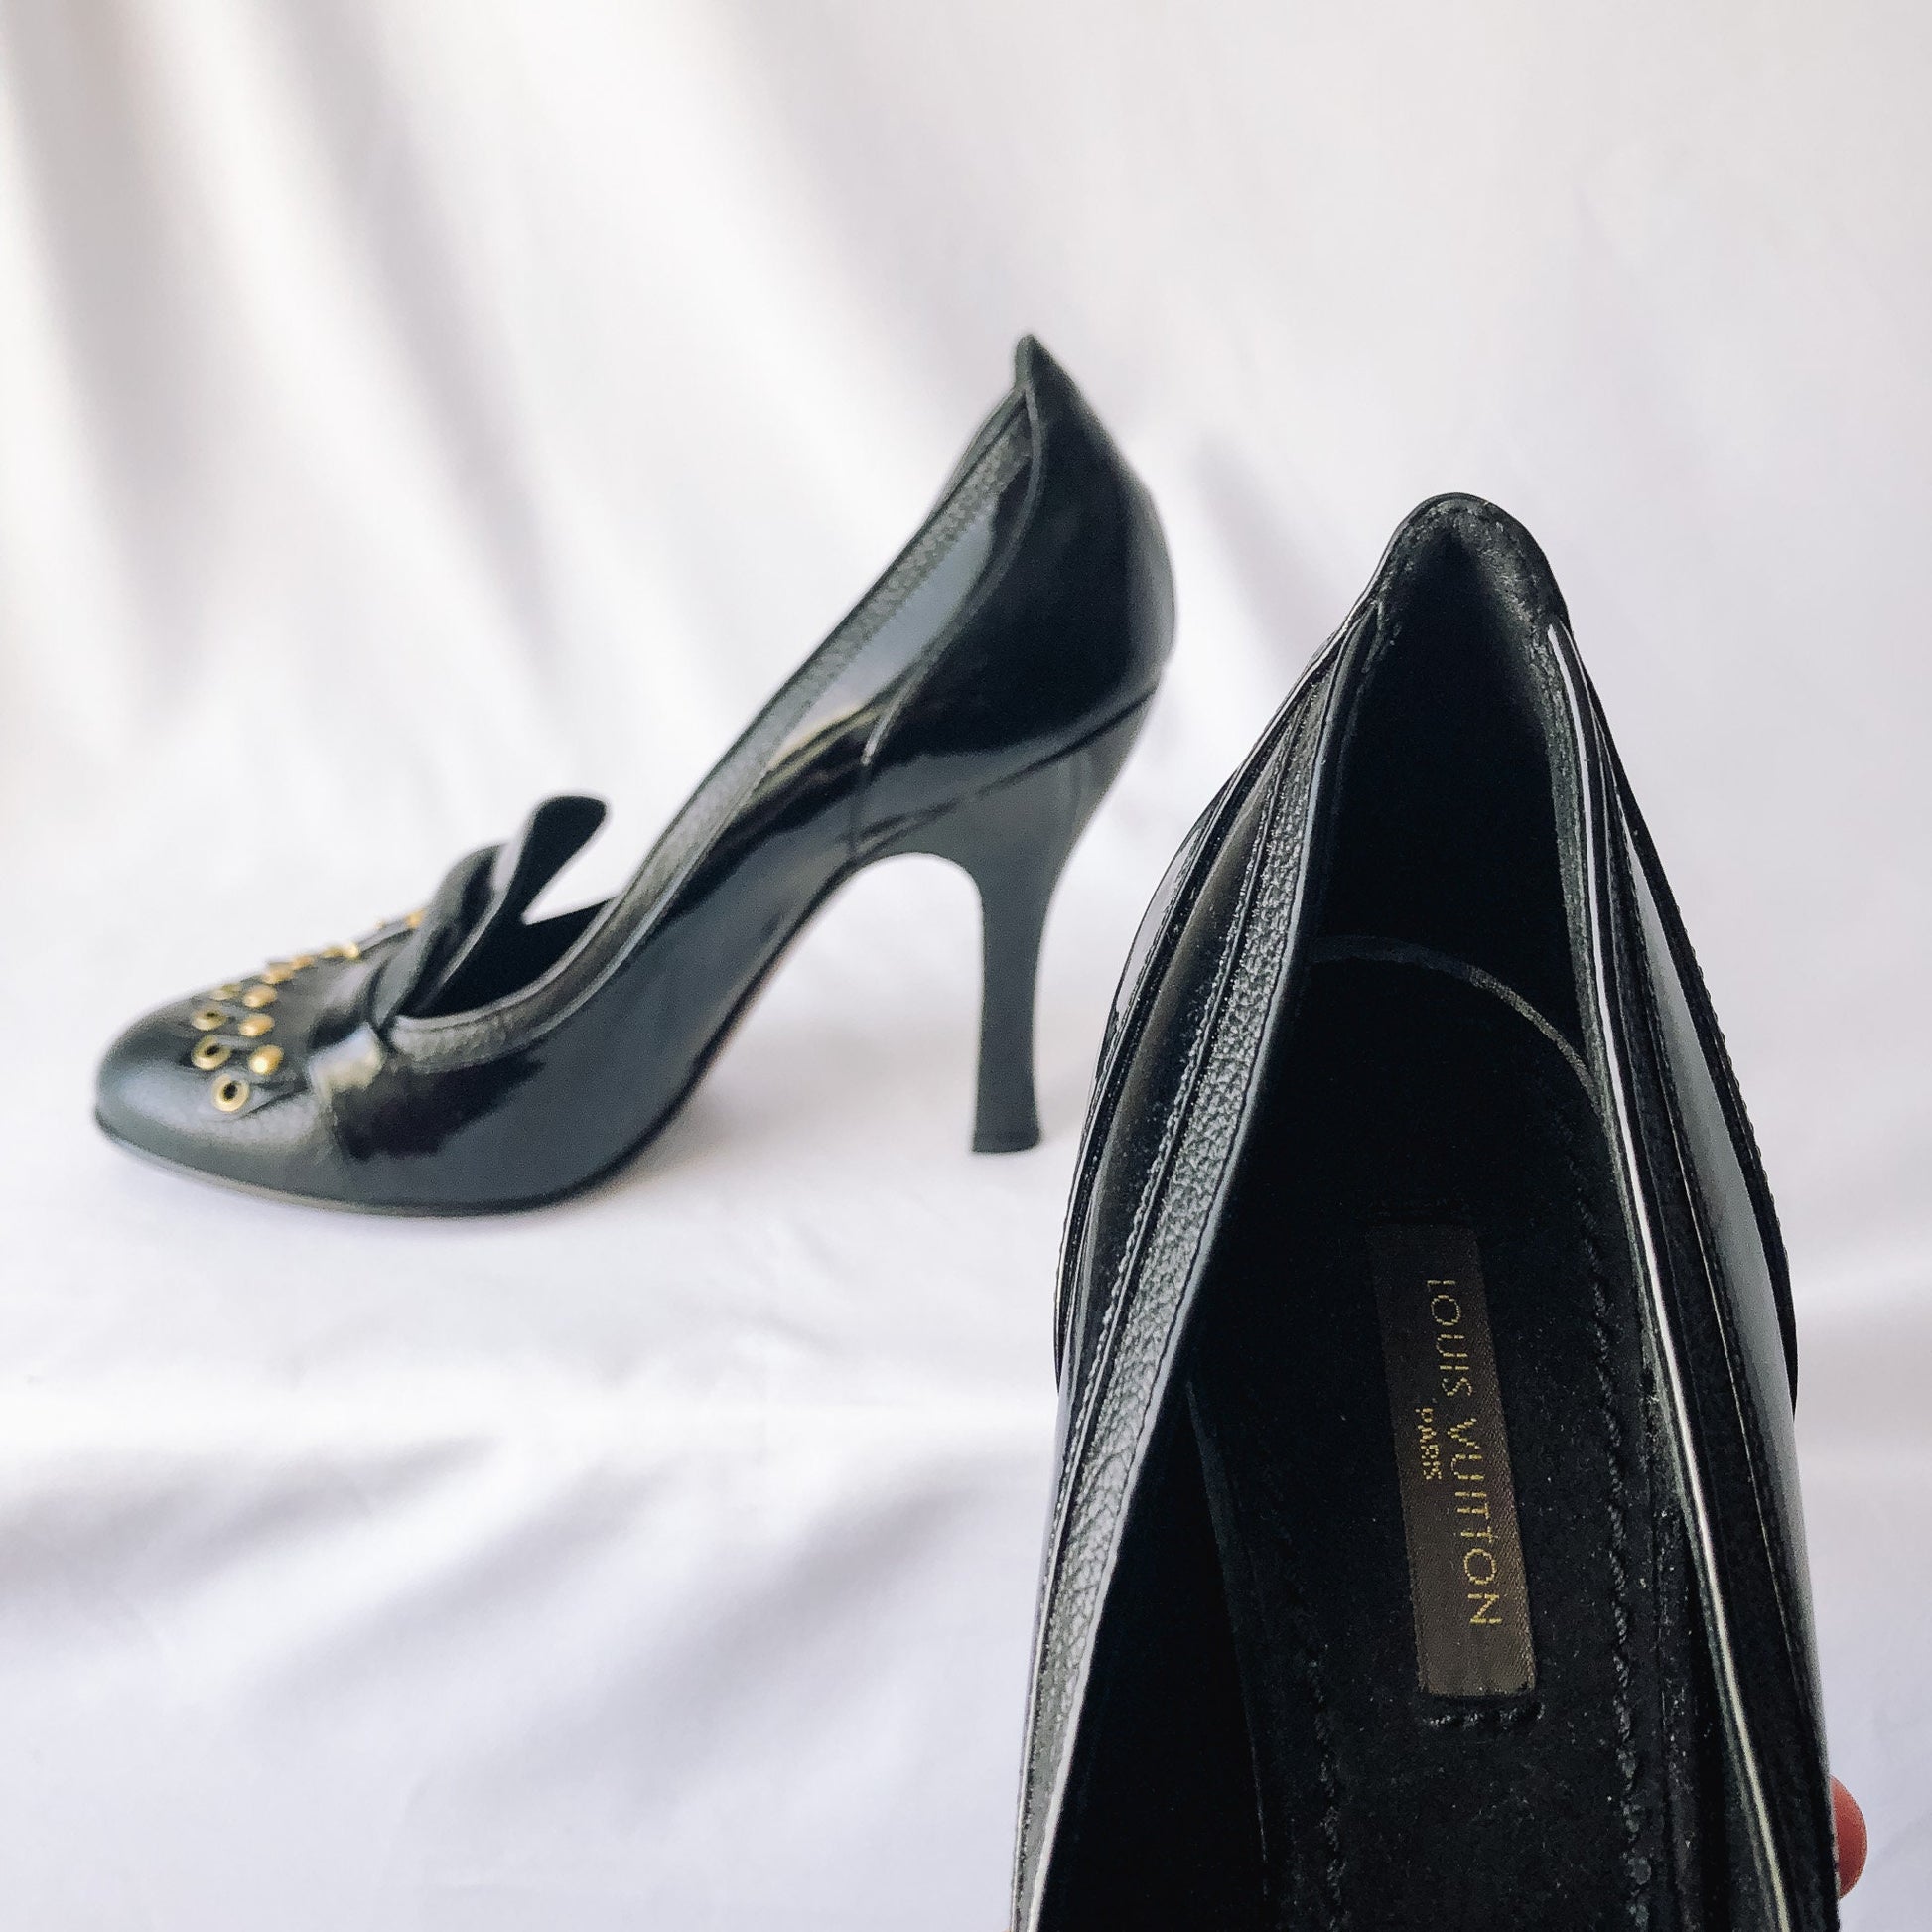 Louis Vuitton - Authenticated Heel - Patent Leather Black for Women, Very Good Condition